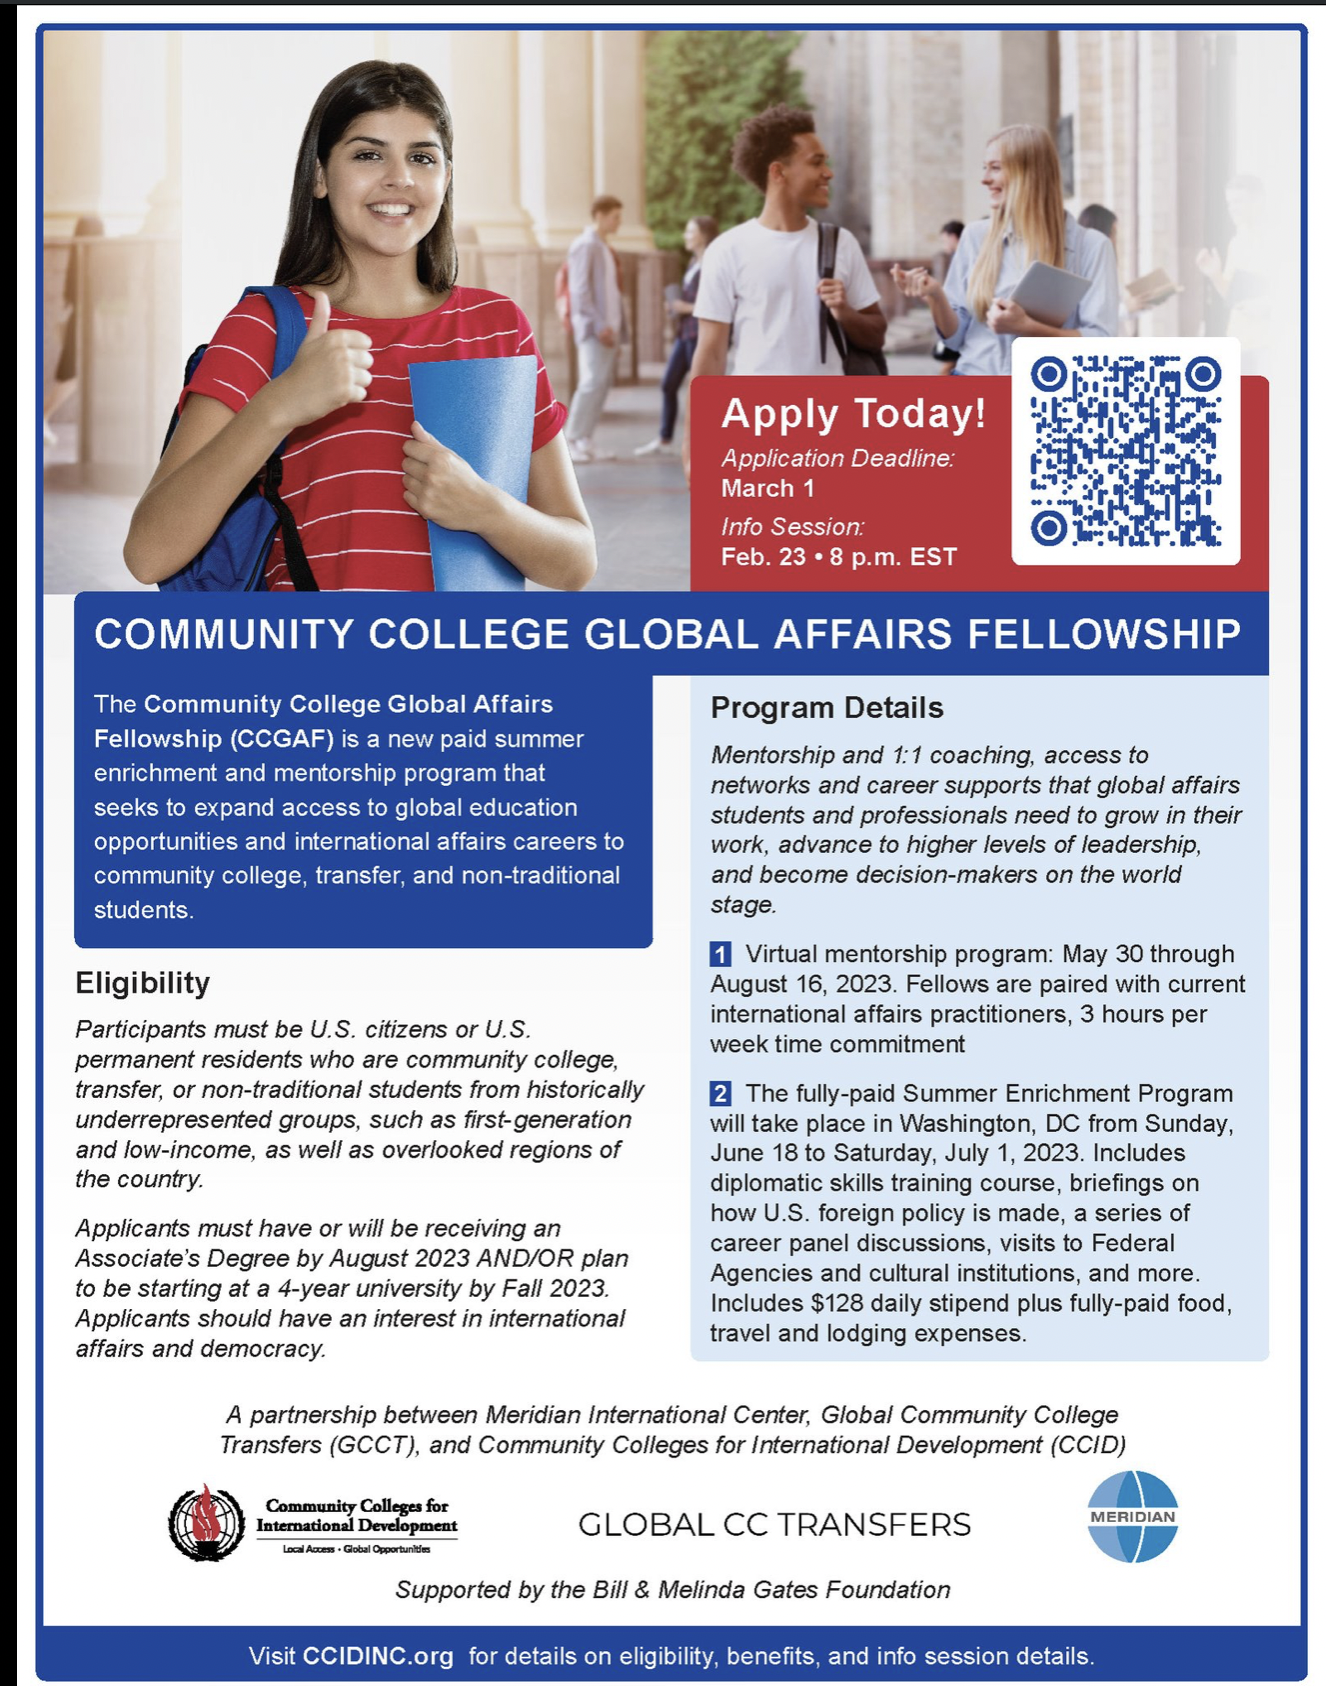 Community College Global Affairs Fellowship ($128 daily stipends; deadline  3/1/2023) - The Japan Studies Program at LaGuardia Community College